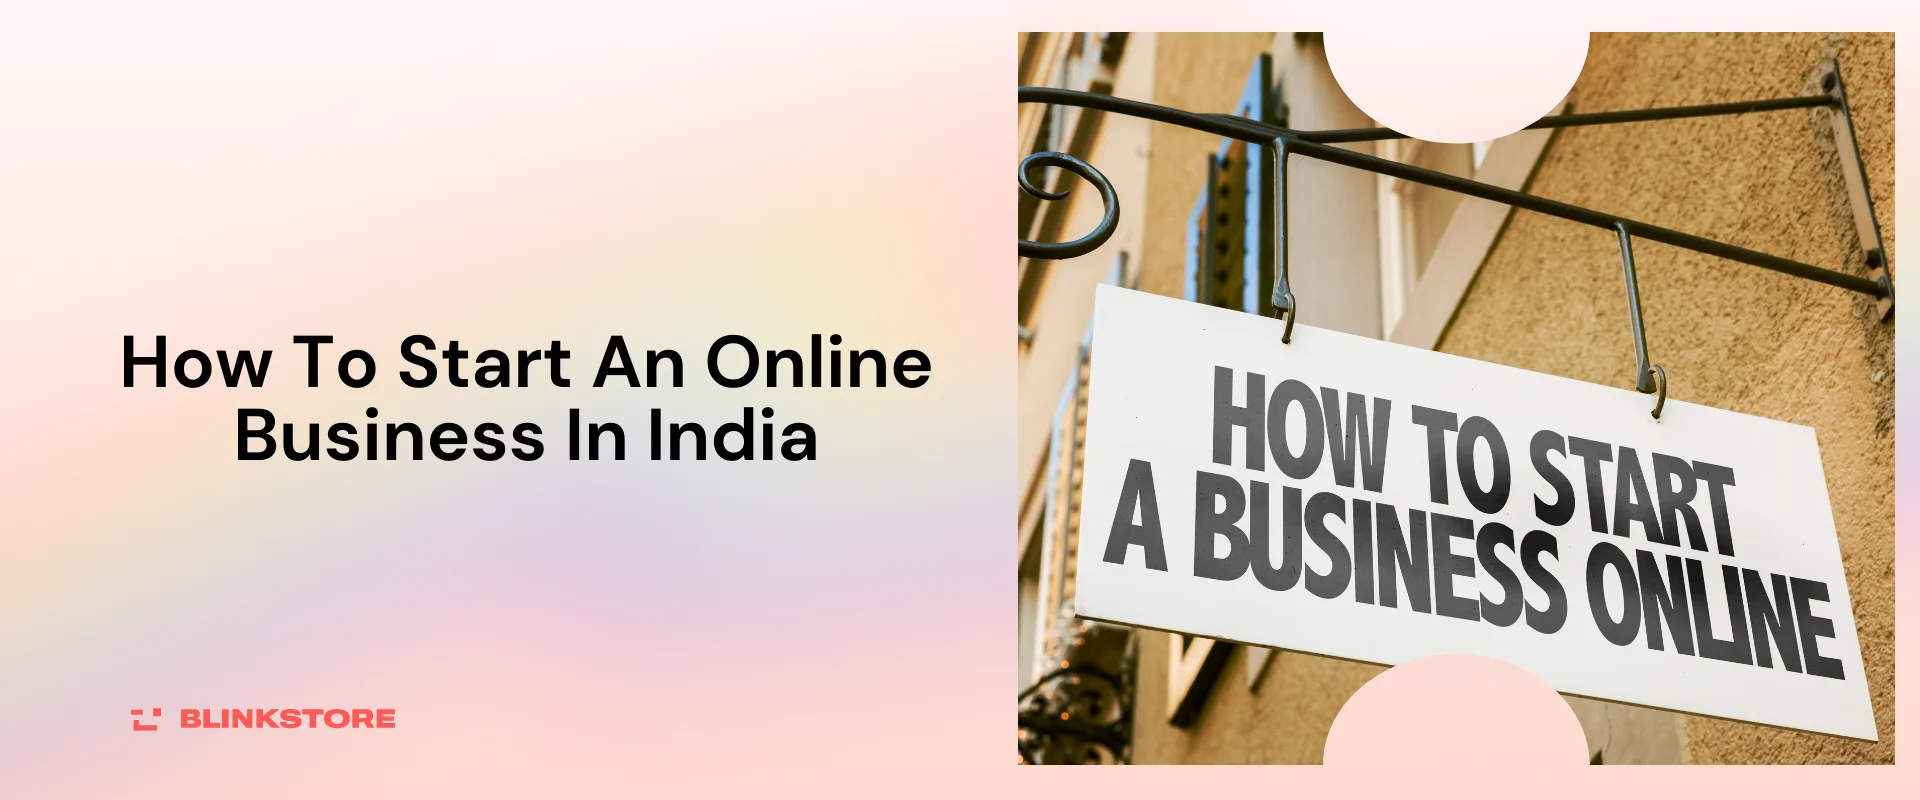 How To Start An Online Business In India